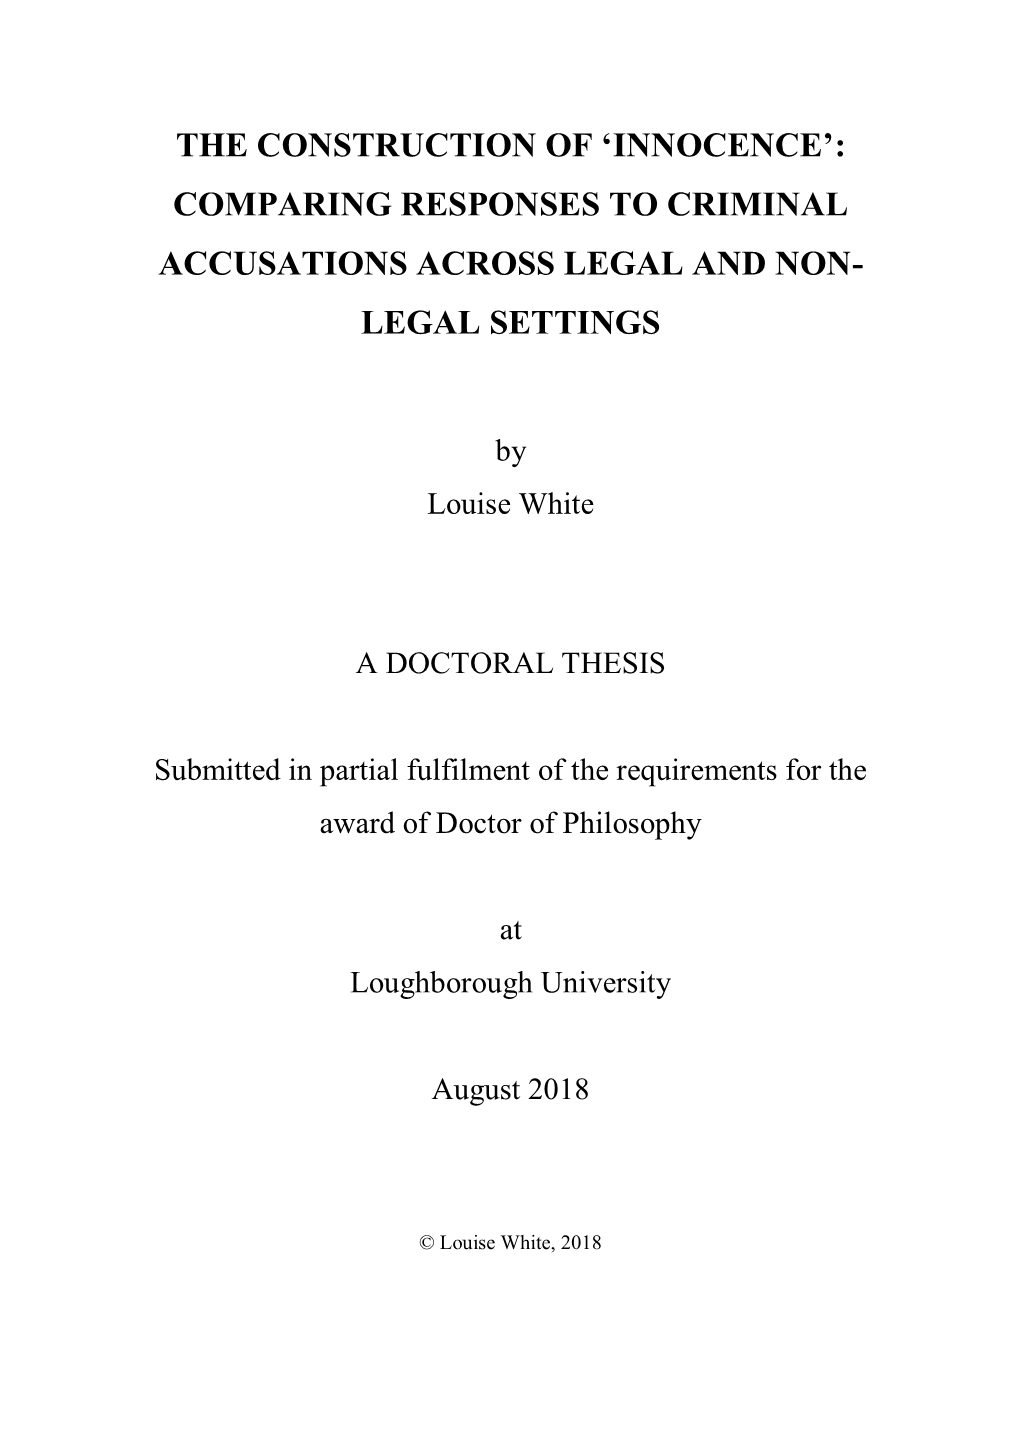 Innocence’: Comparing Responses to Criminal Accusations Across Legal and Non- Legal Settings